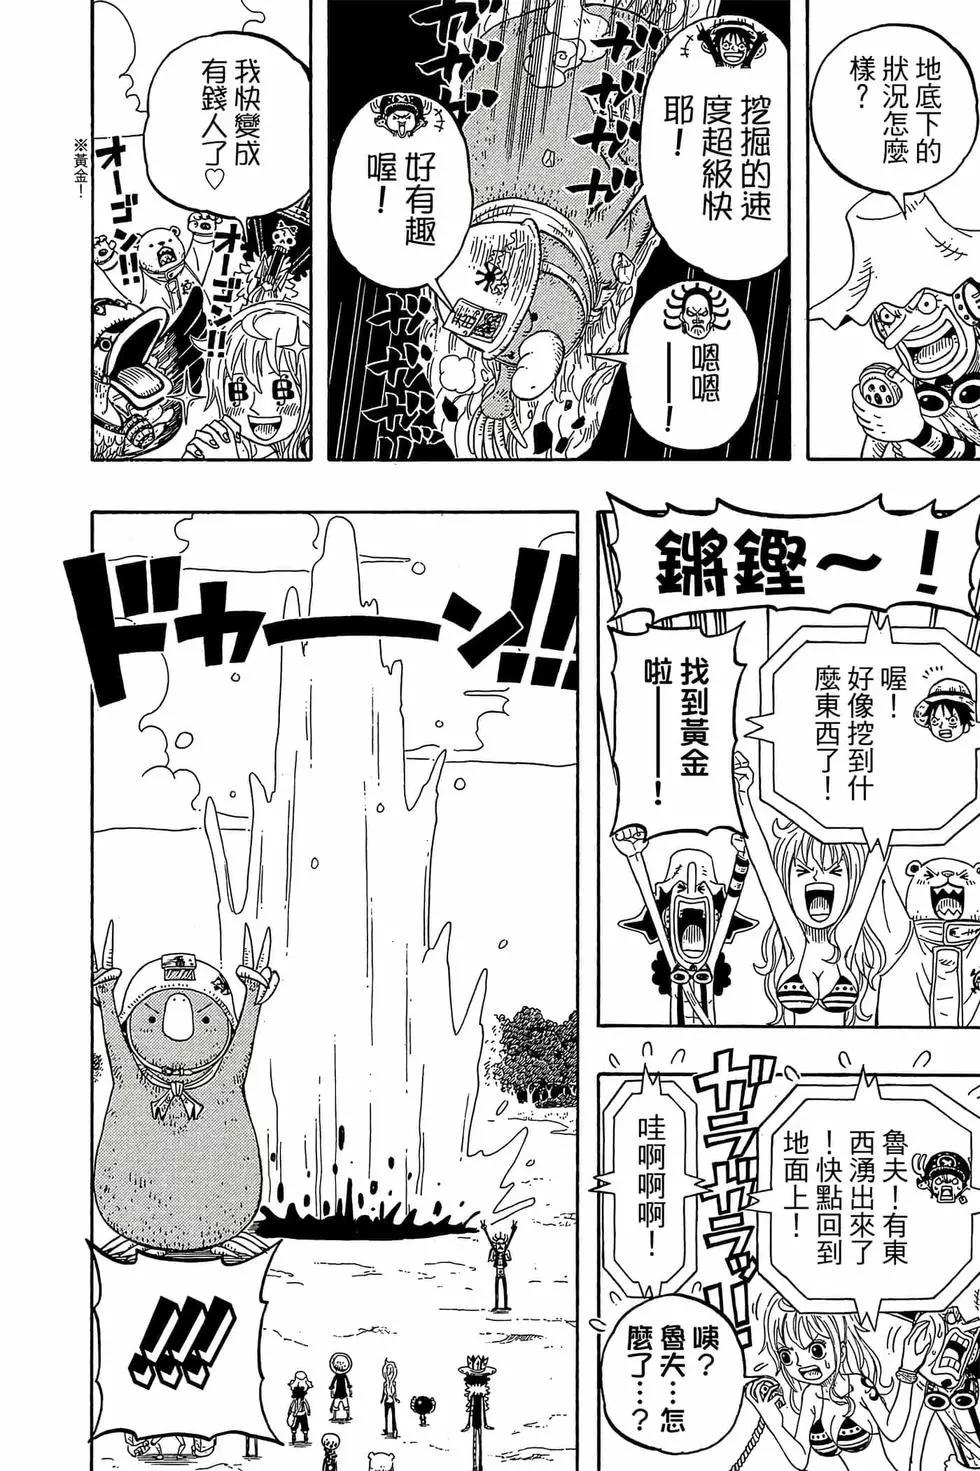 One piece party - 第01卷(3/4) - 1